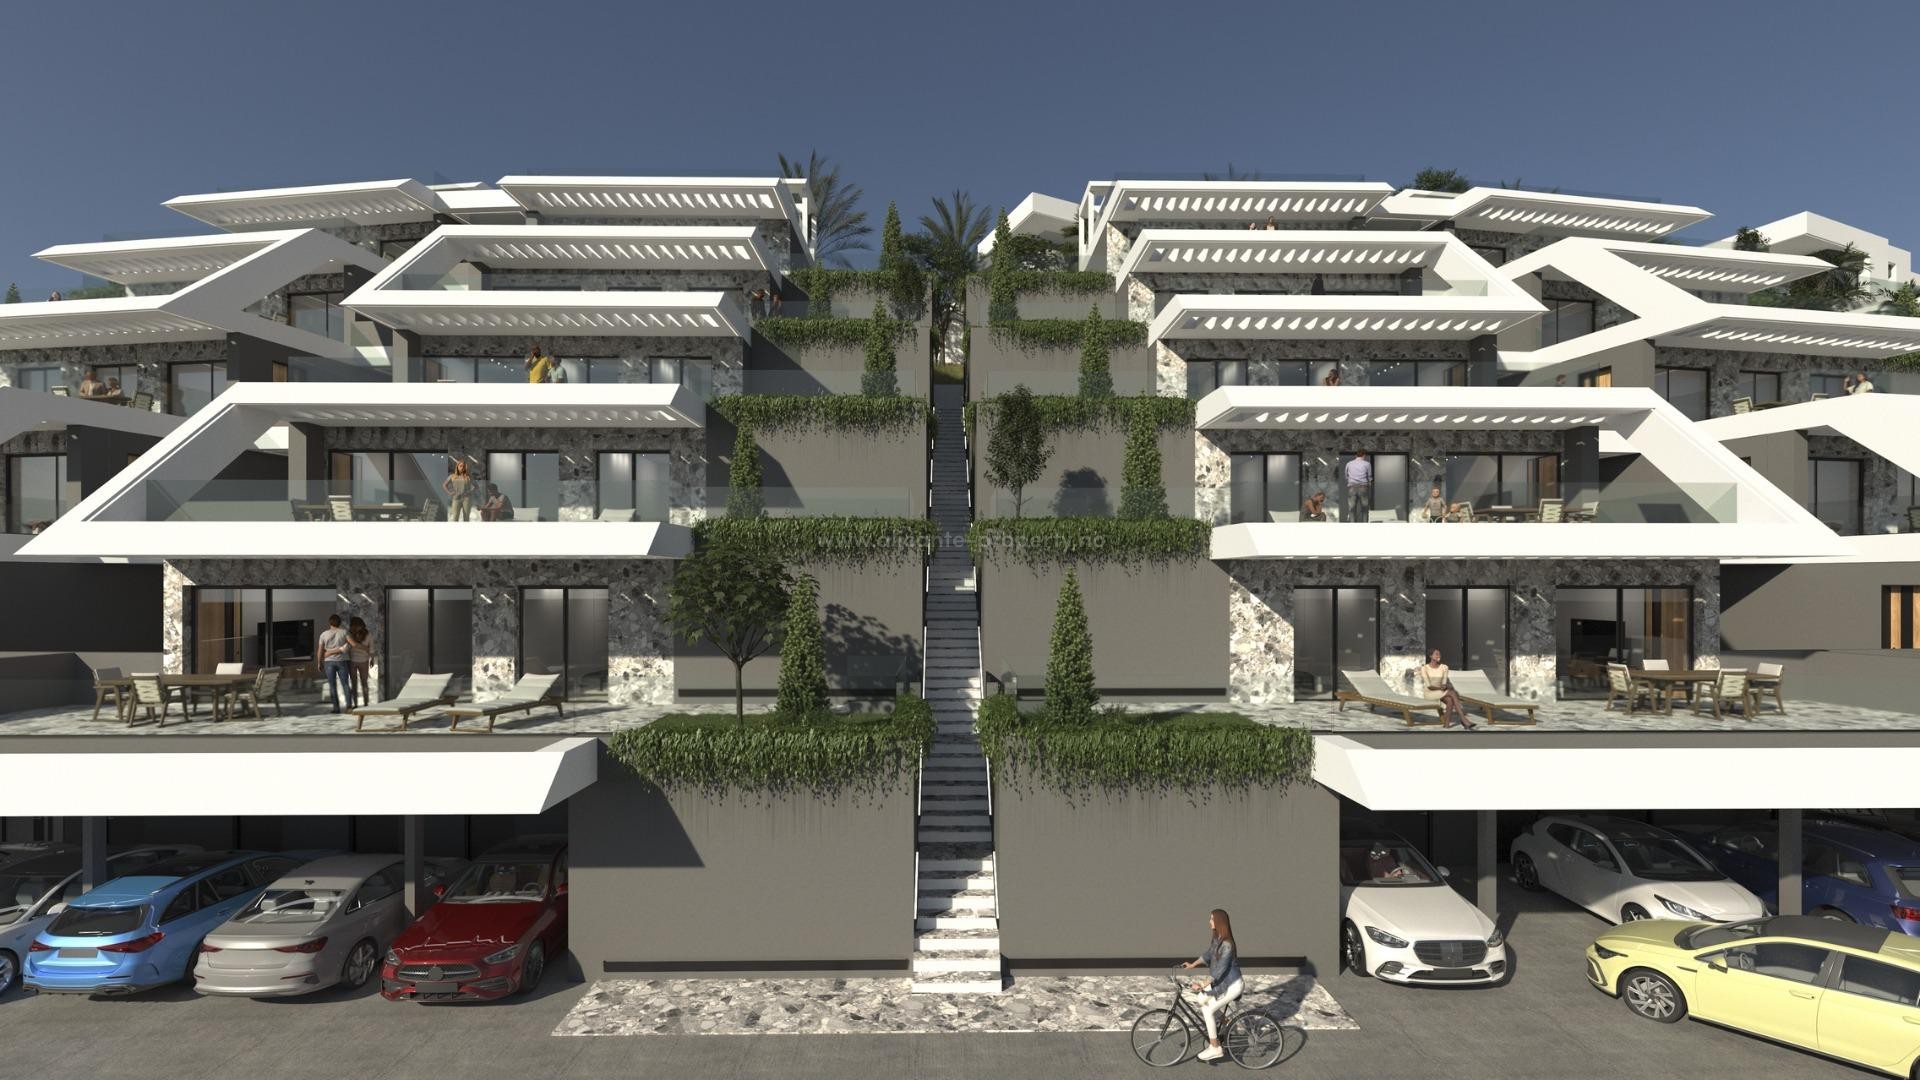 New exclusive residential complex in Finestrat with modern apartments/penthouses, 2 bedrooms, 2 bathrooms, great communal swimming pool, parking spaces